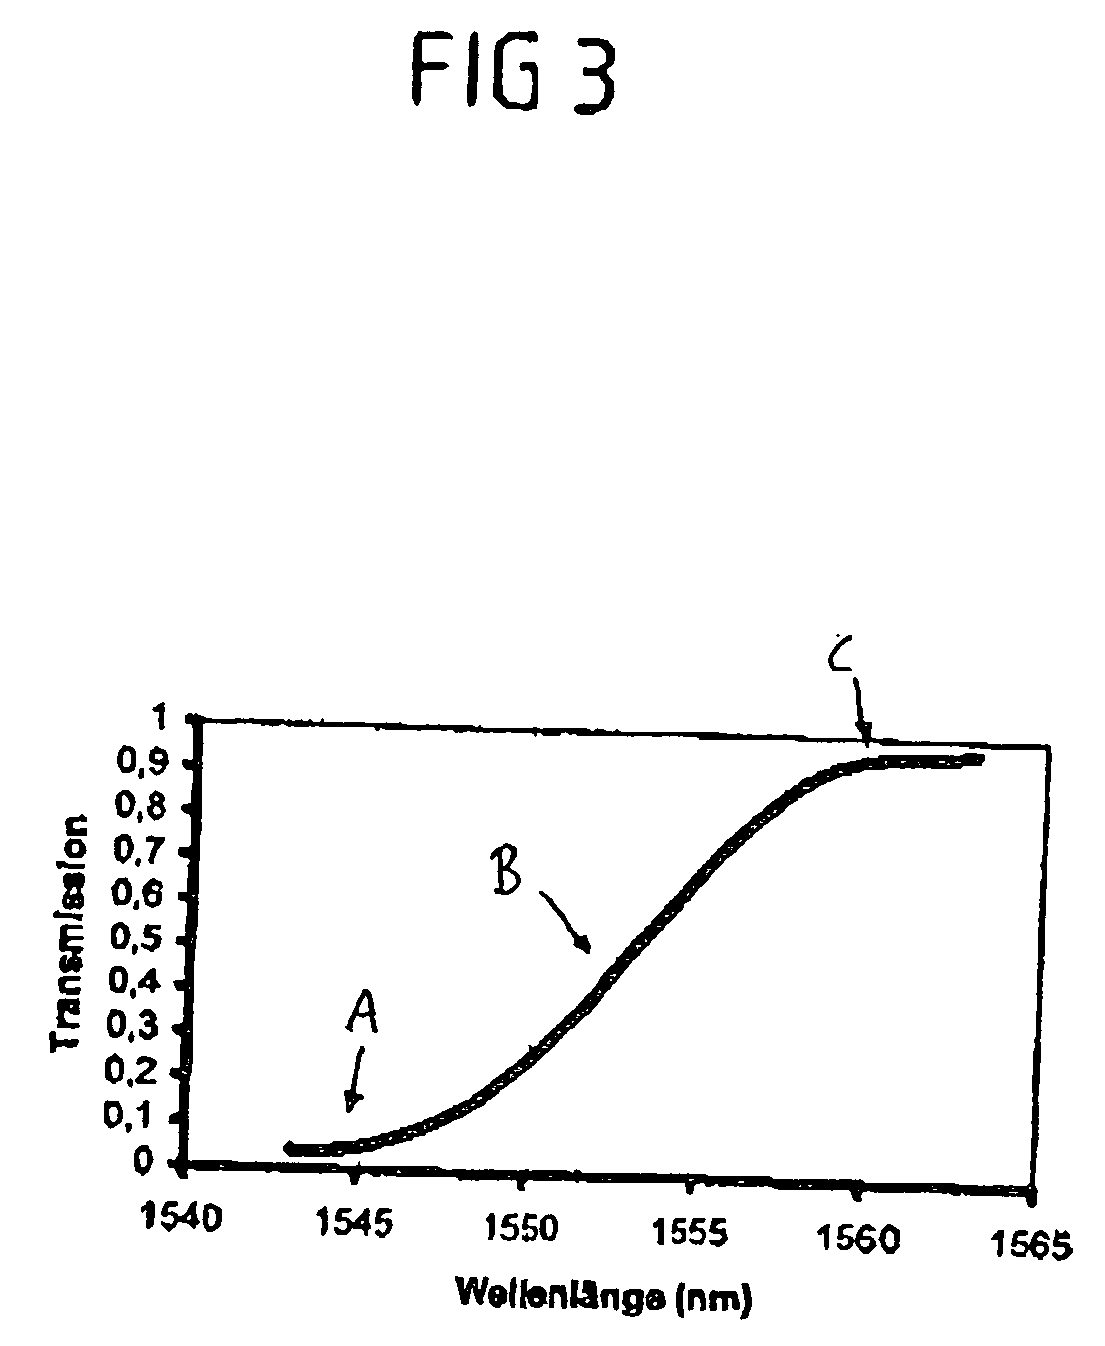 Optoelectronic arrangement having at least one laser component, and a method for operating a laser component